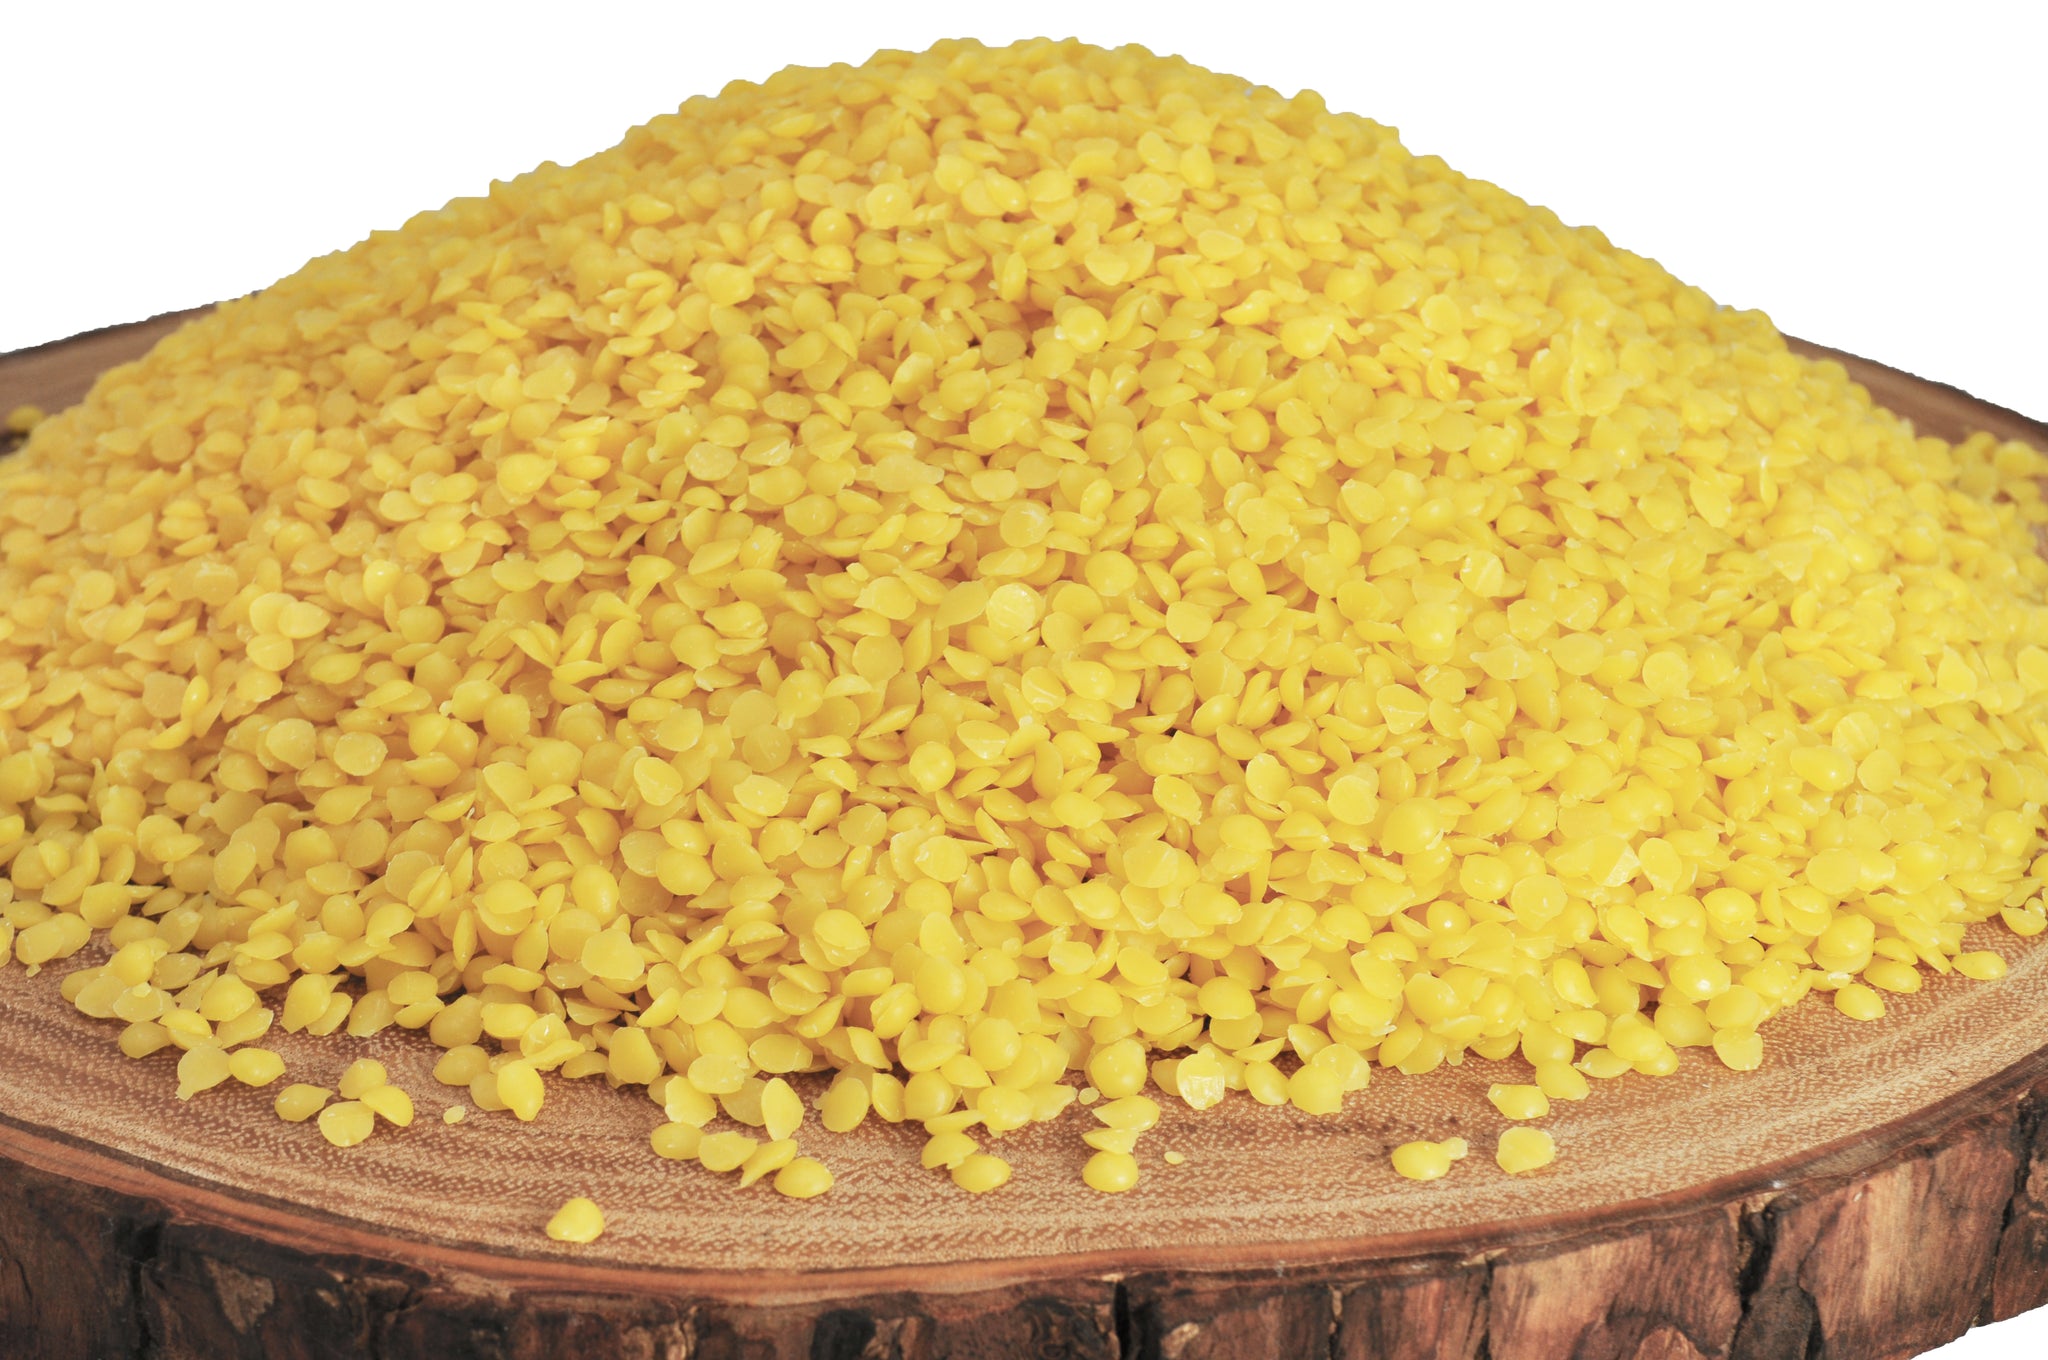 Now Beeswax Pellets, Natural Yellow, 250g - Your Health Food Store and So  Much More!